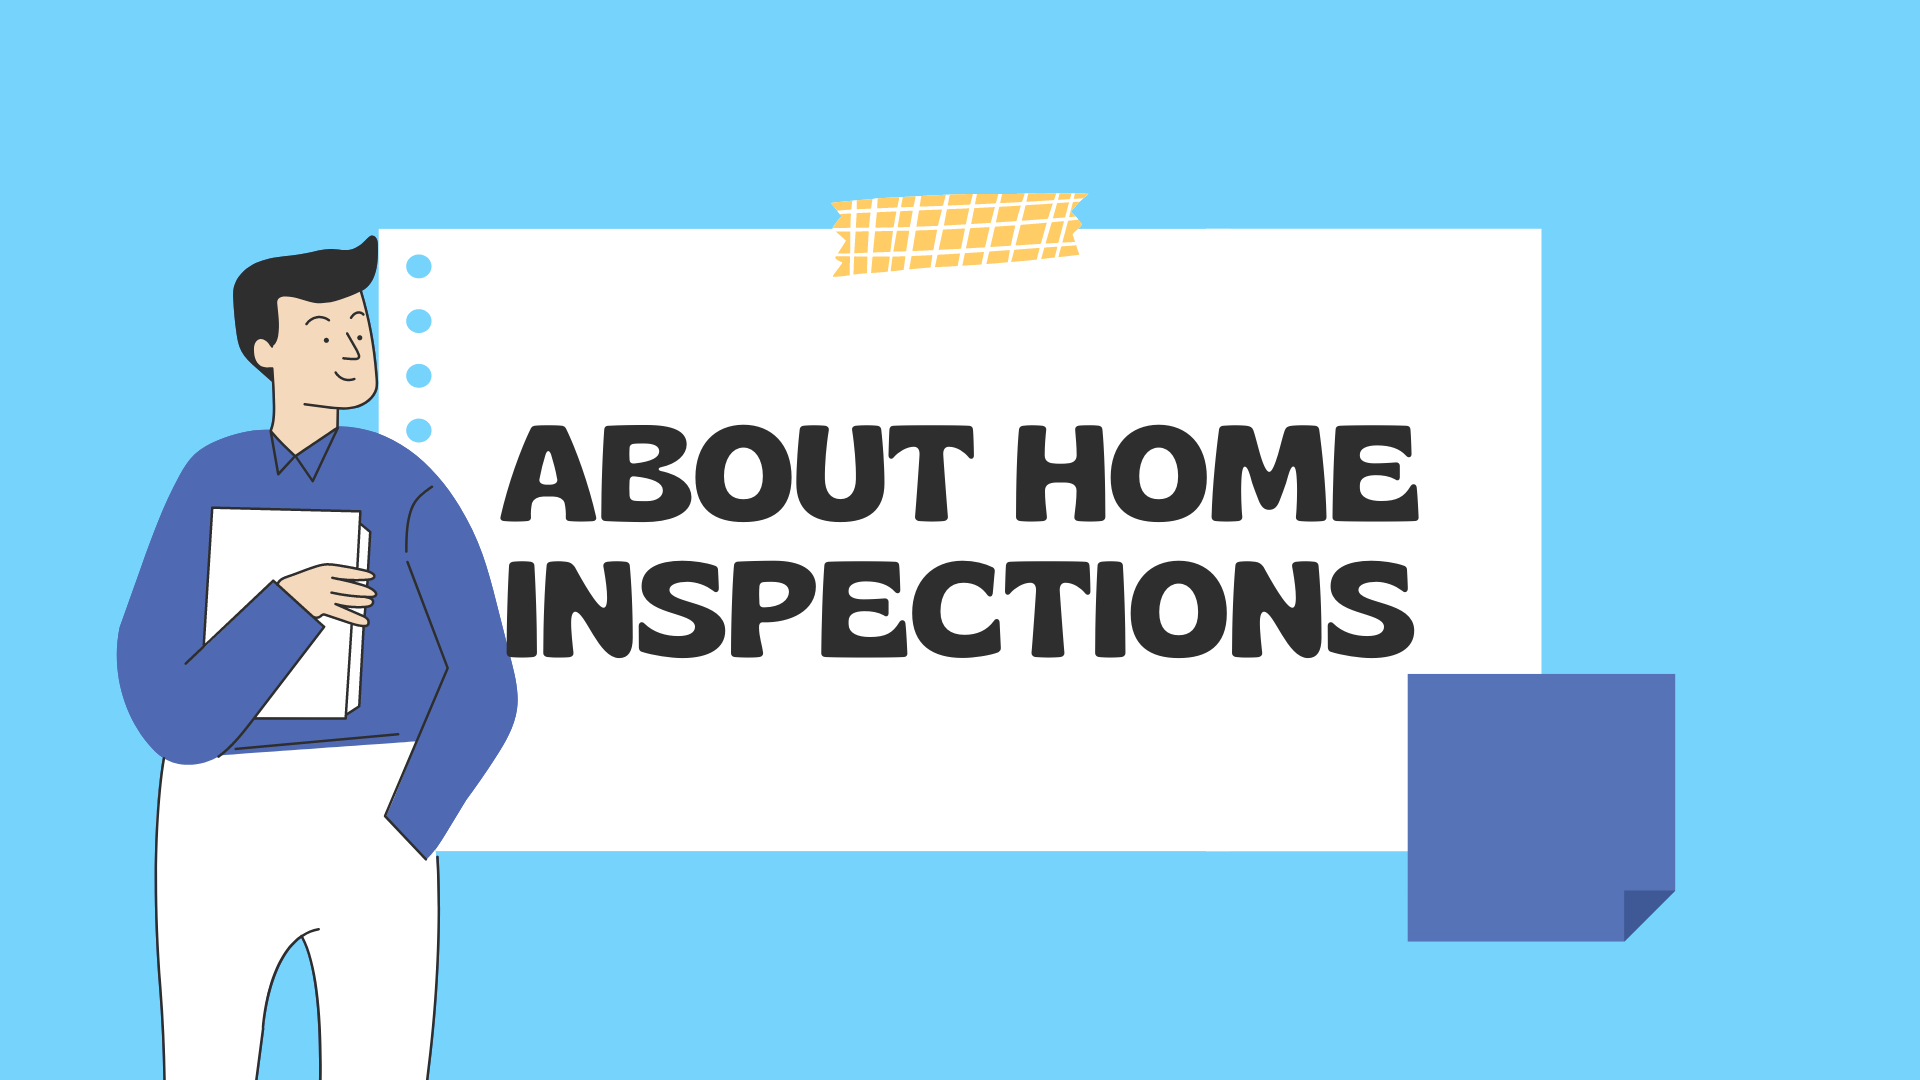 About Home Inspections